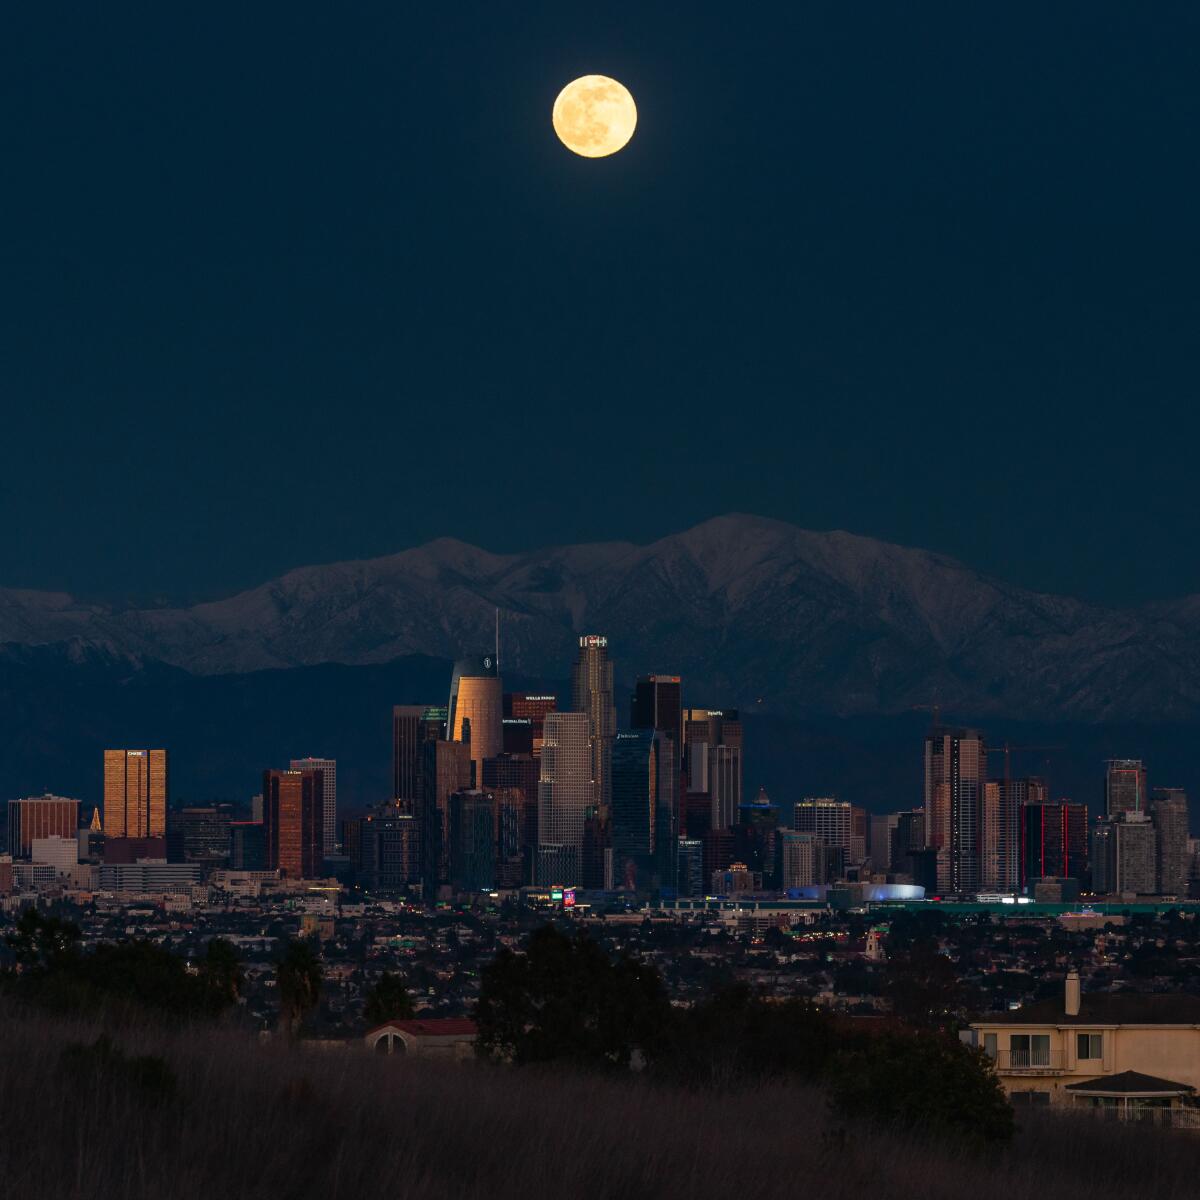 Moon over the downtown L.A. skyline